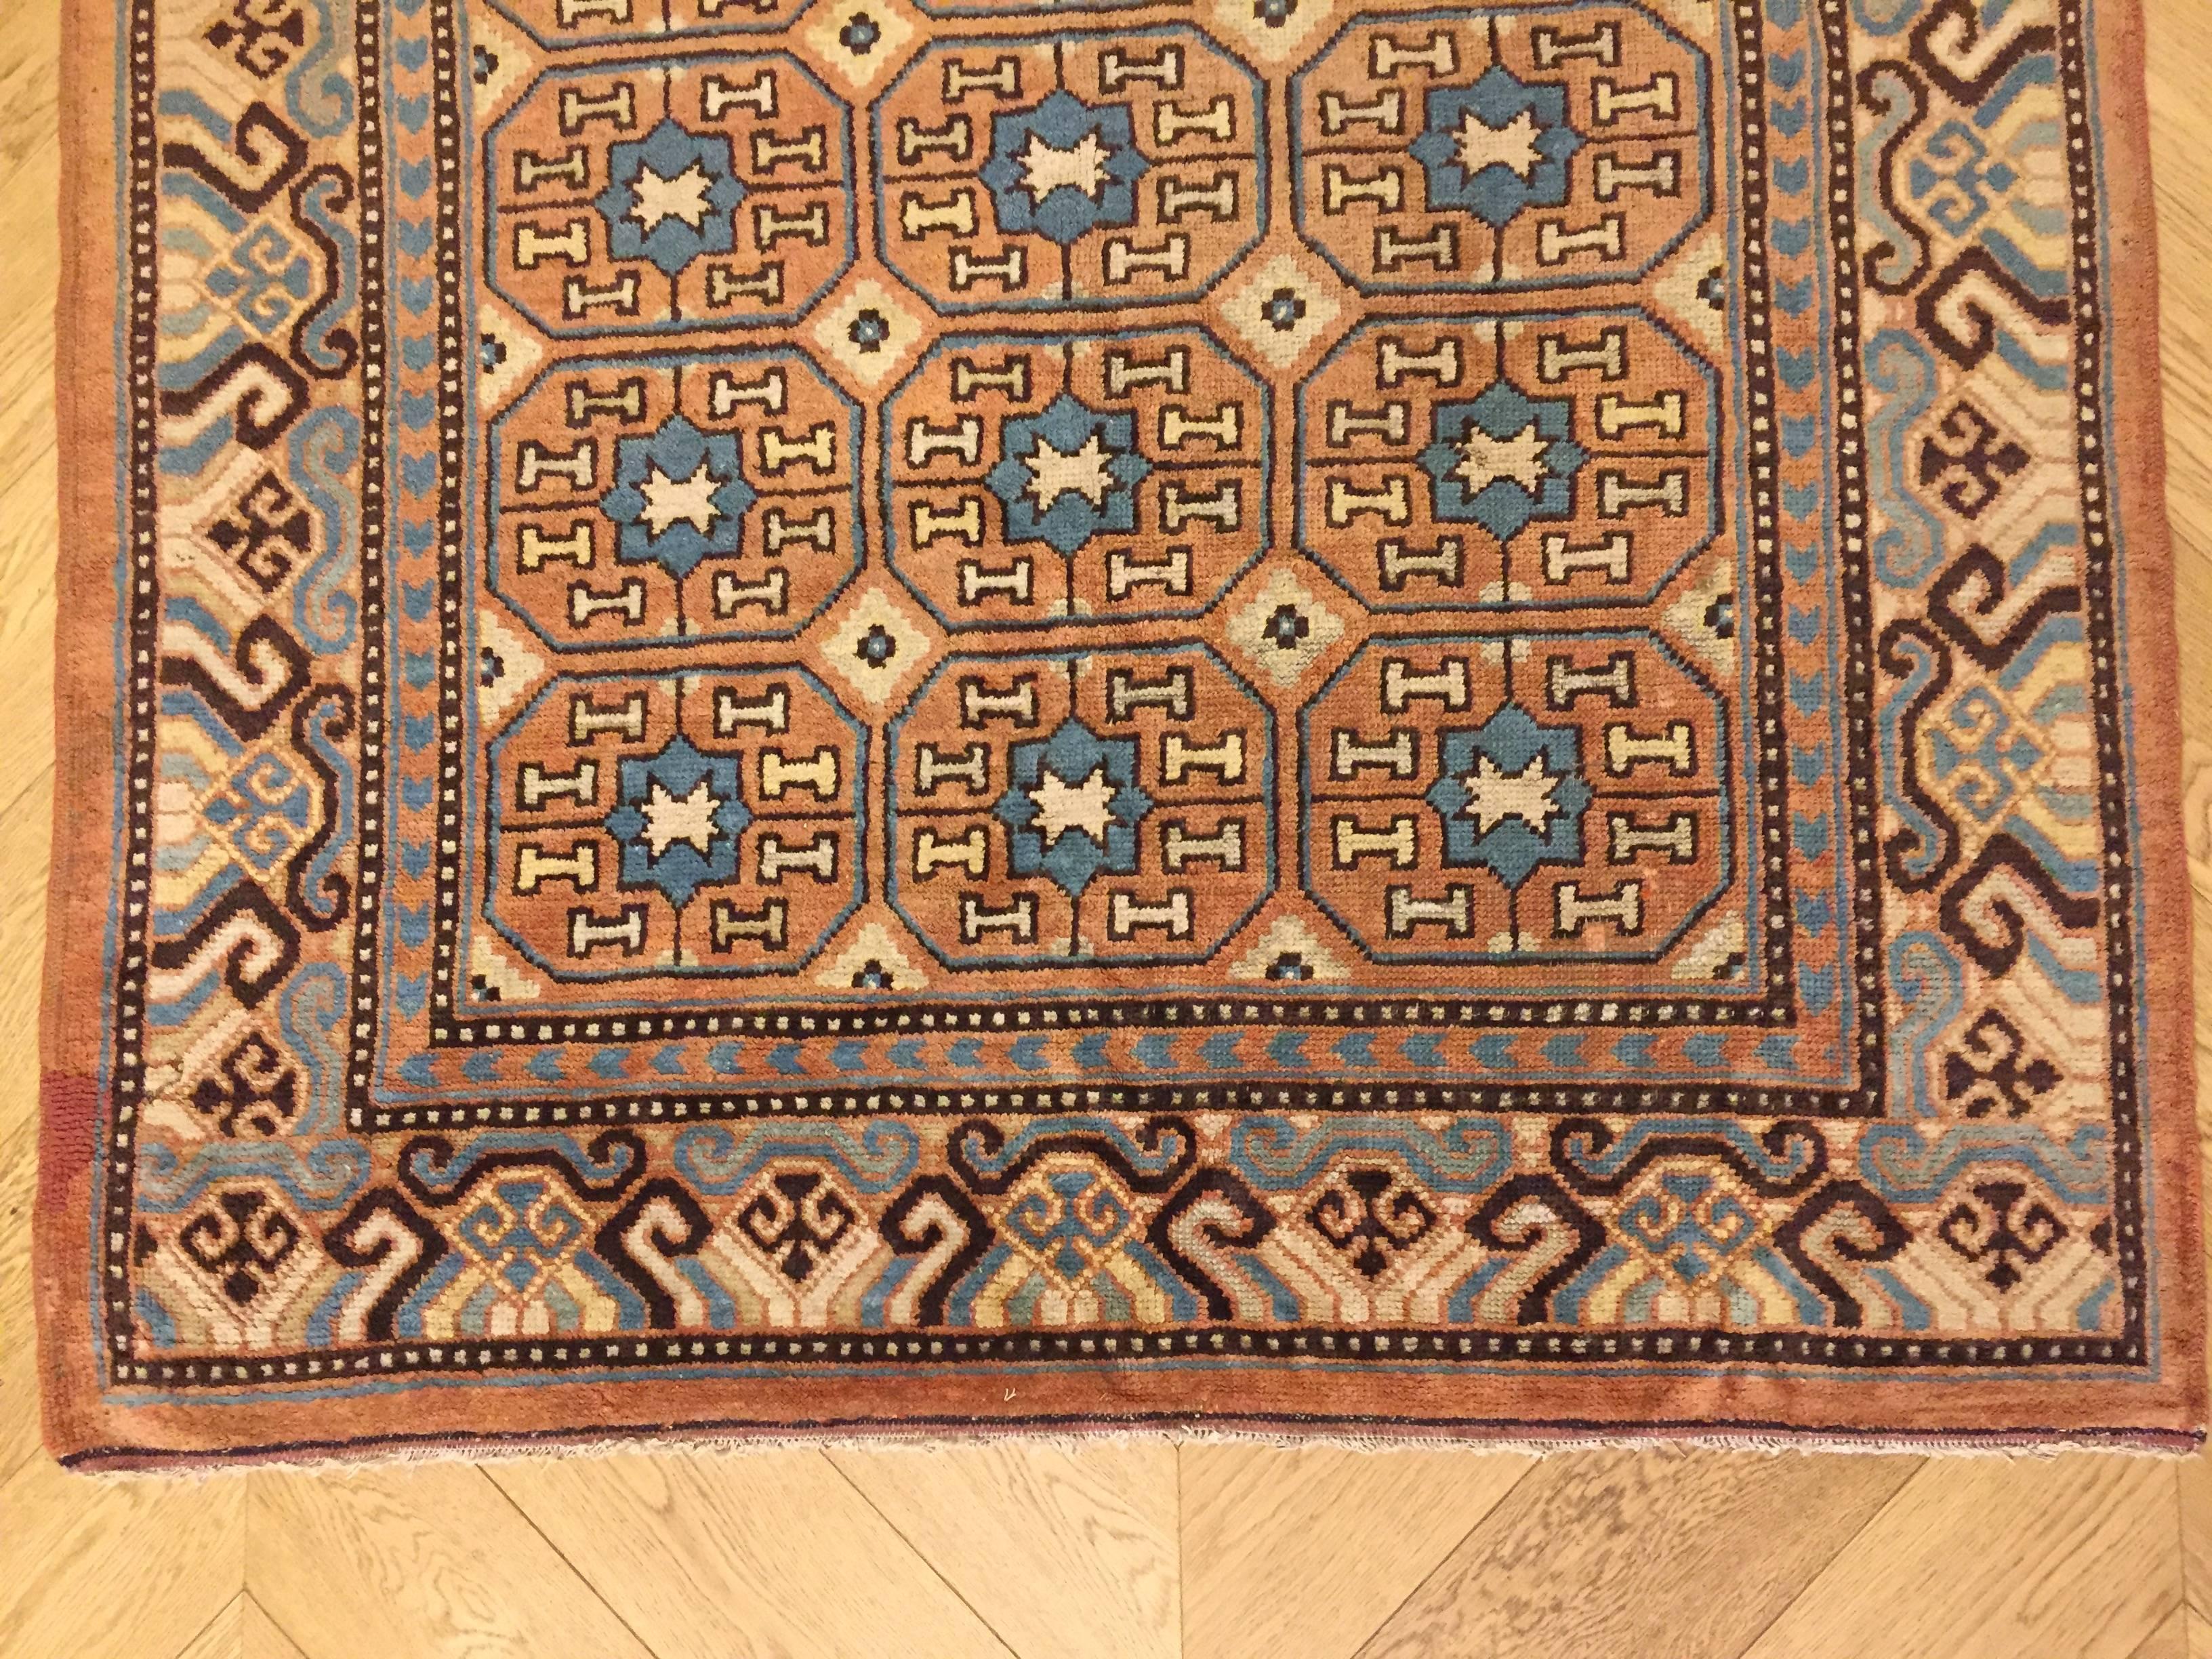 19th Century Brown and Blue Stylized Rosette Gul Chinese Khotan Rug, circa 1870s For Sale 1